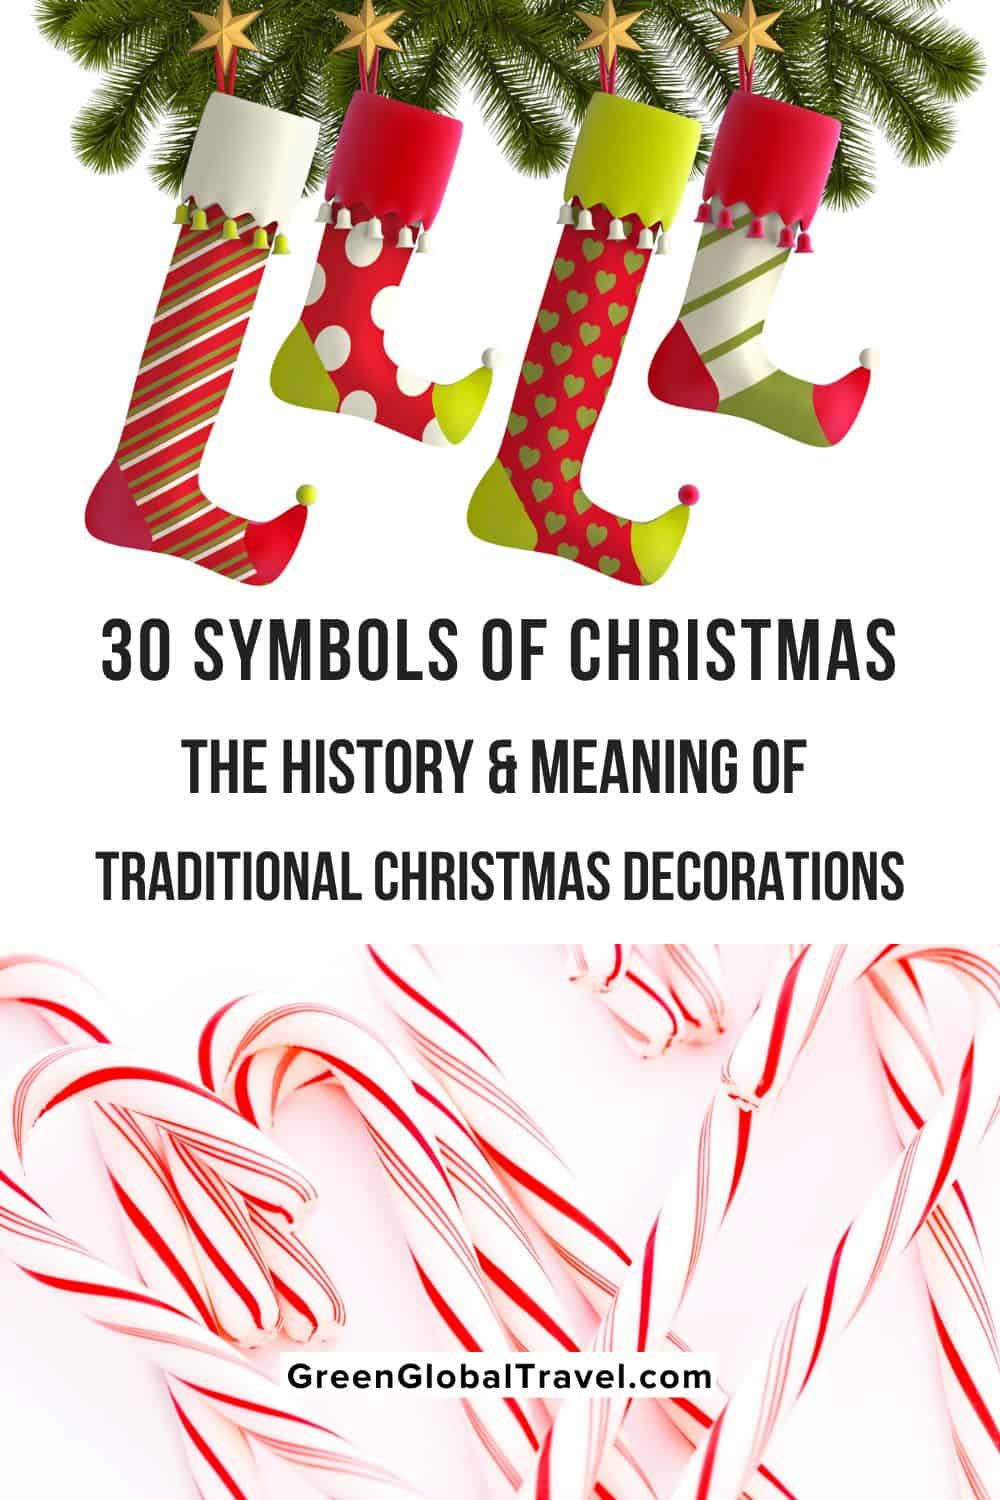 30 Symbols of Christmas: The History & Meaning of Traditional Christmas Decorations | christmas symbols | christmas customs | christmas legends | christmas tree decorations | christmas tree angel topper | christmas tree star topper | evergreen christmas tree | Hanging Christmas Stockings |holiday wreath | tinsel christmas tree | pickle ornament | Advent Candles | Boughs of Holly | Christmas Bells | Christmas Garland | Christmas Lights | Hanging Mistletoe |